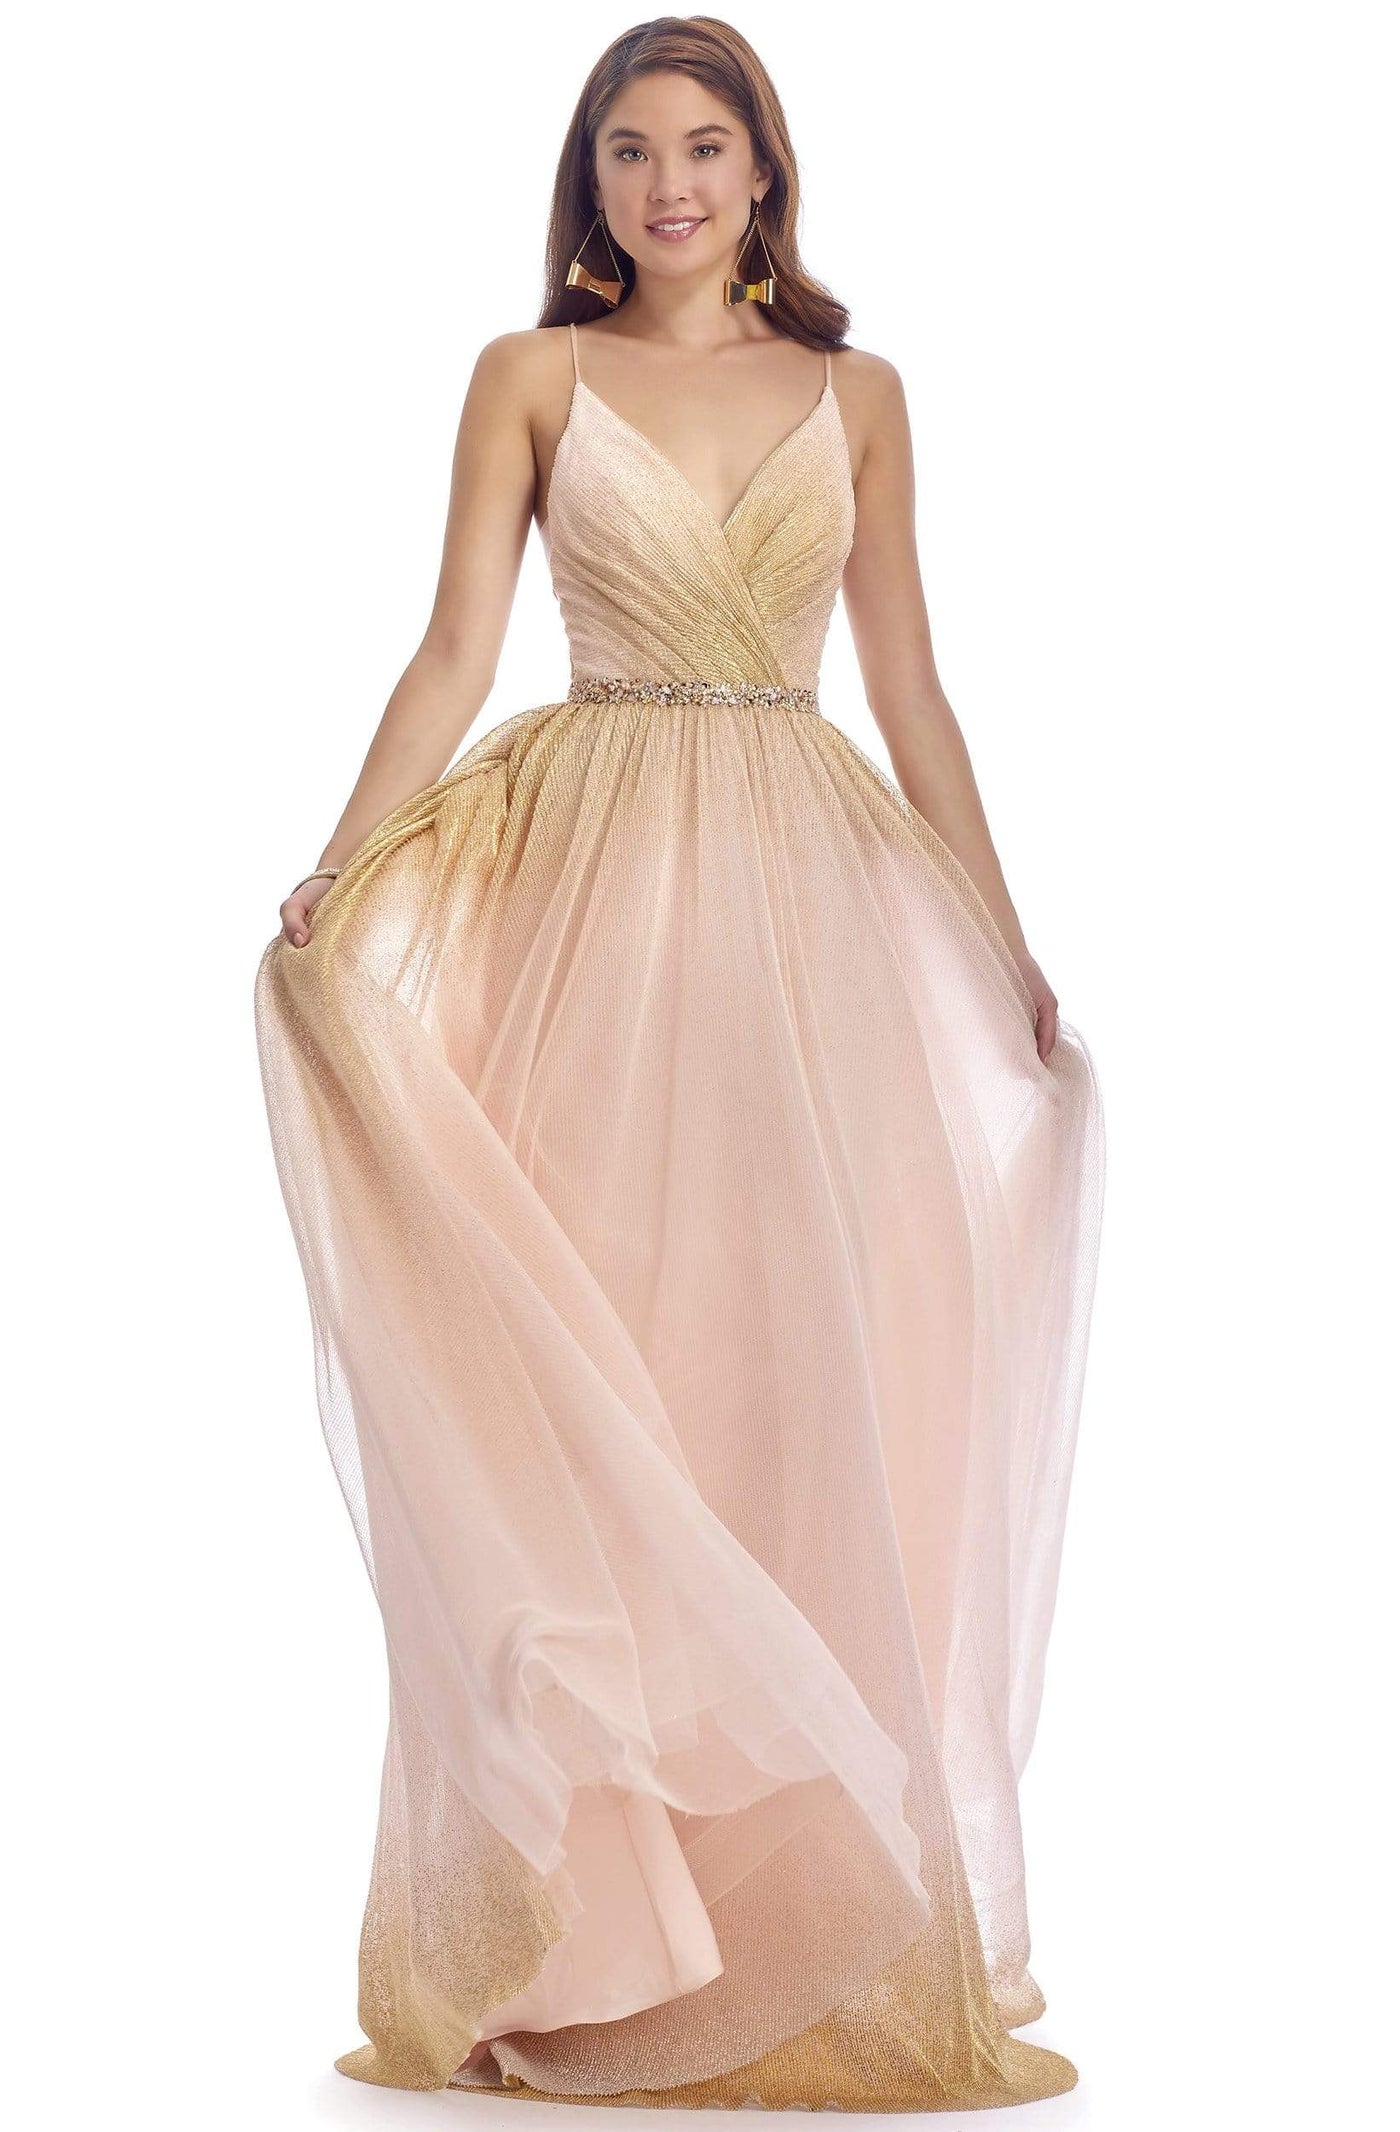 Clarisse - 8121 Sweetheart Bejeweled Waist A-Line Dress Prom Dresses 0 / Blush/Gold